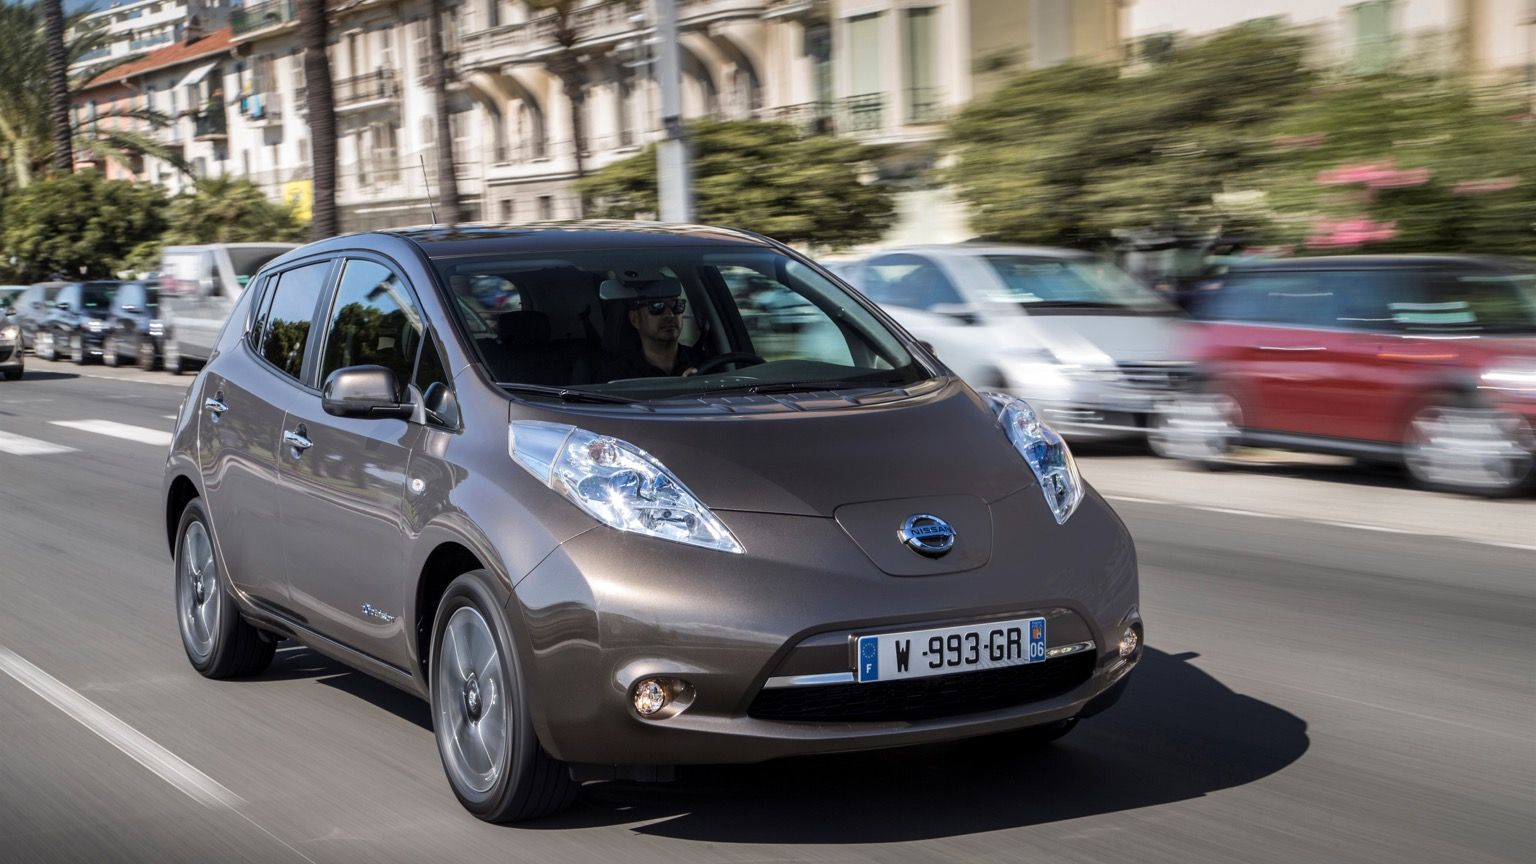 A  Nissan leaf electric car is driving down a city street.